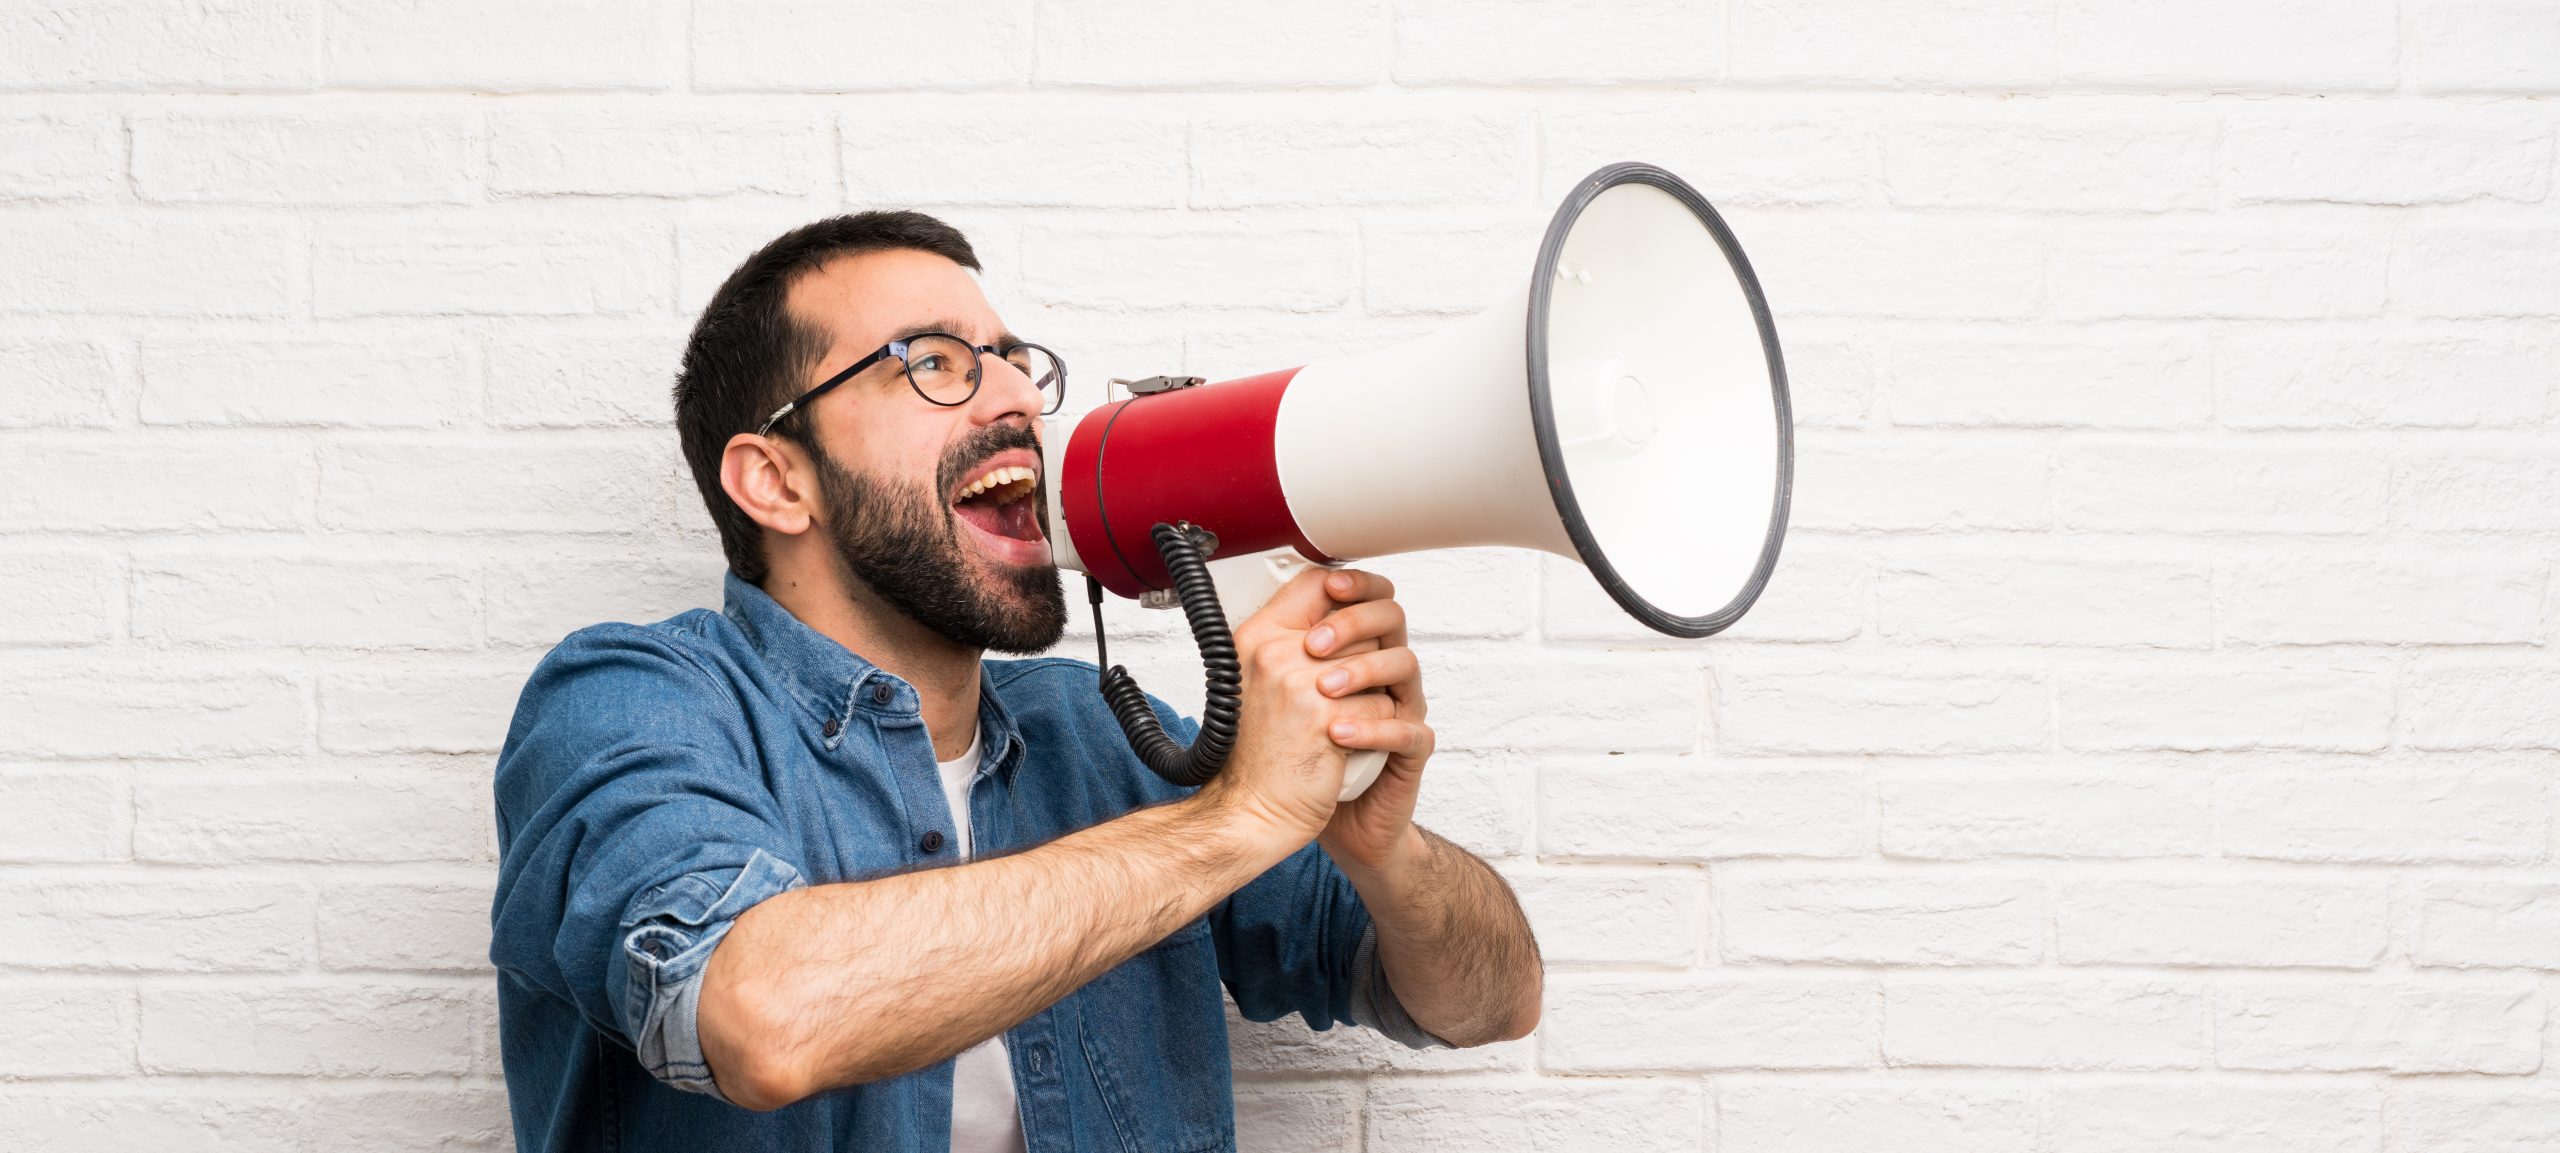 Handsome man with beard over white brick wall shouting through a megaphone